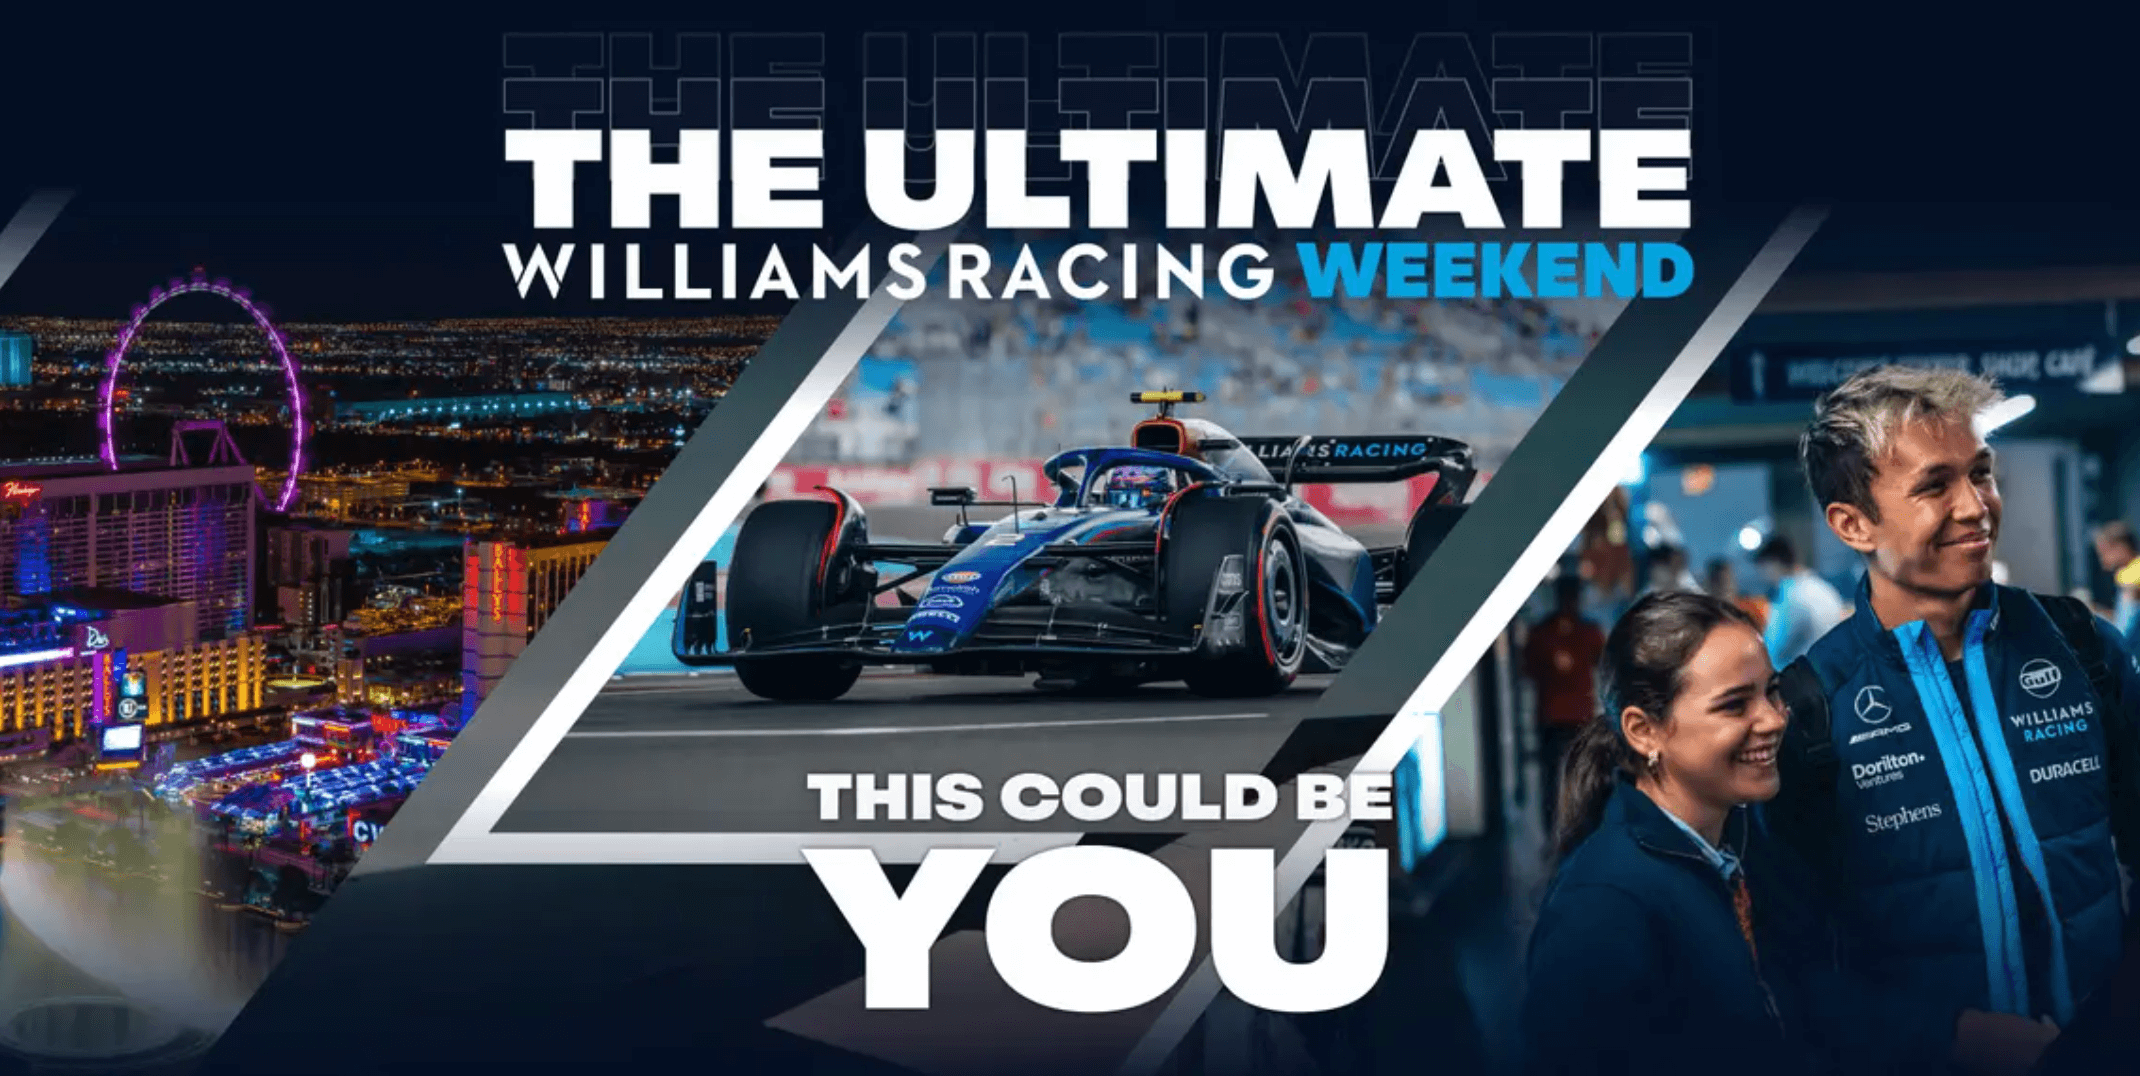 Win a once-in-a-lifetime trip to Las Vegas with Williams Racing